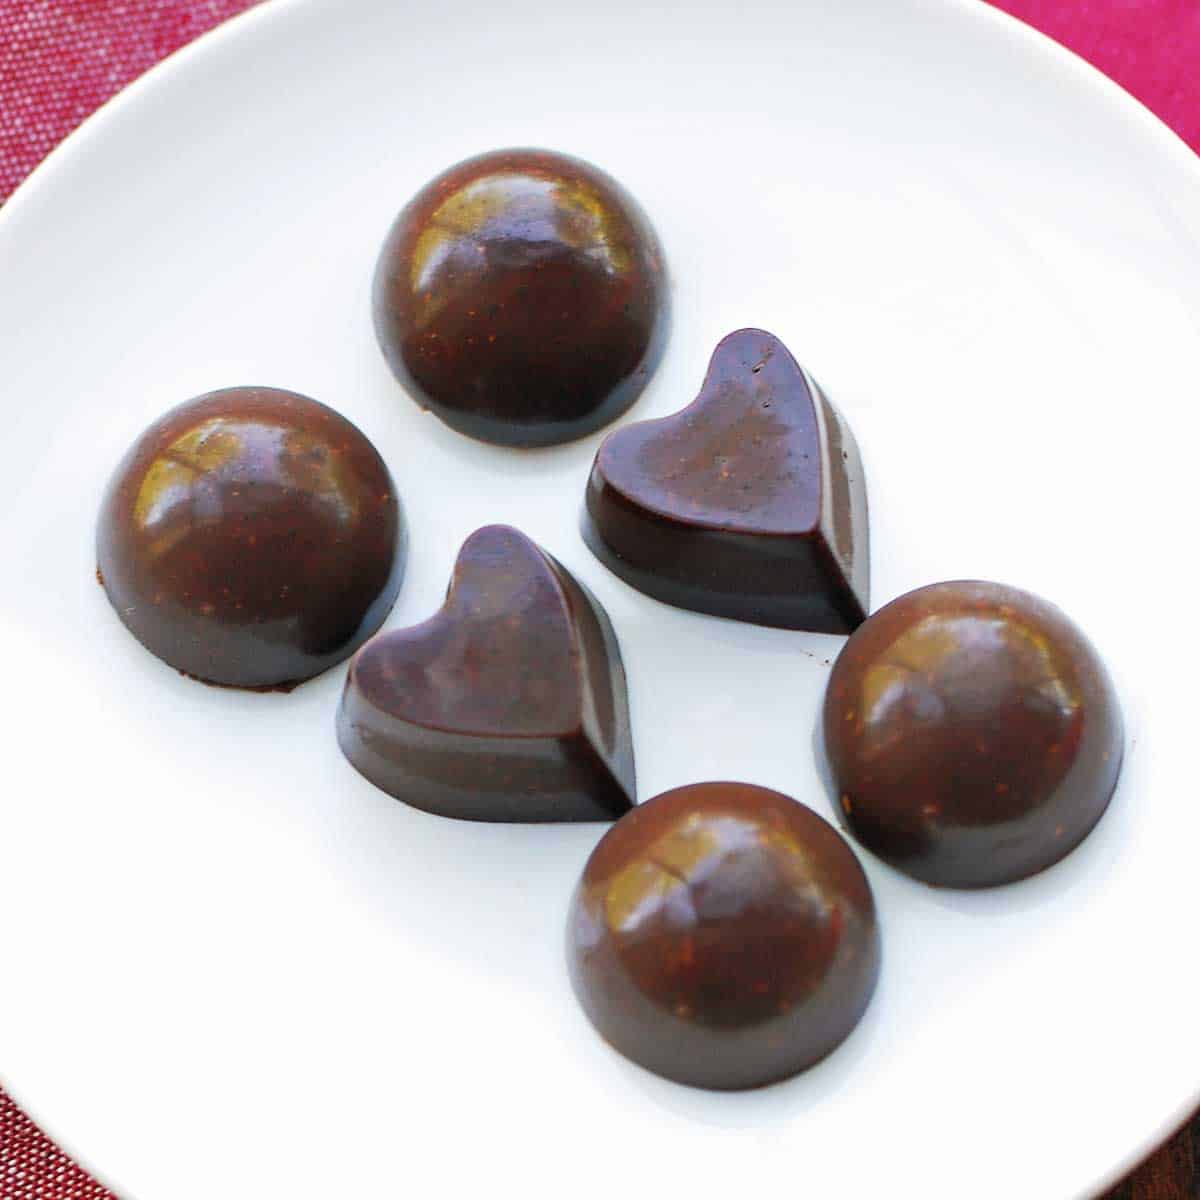 Homemade Chocolate with Coconut Oil